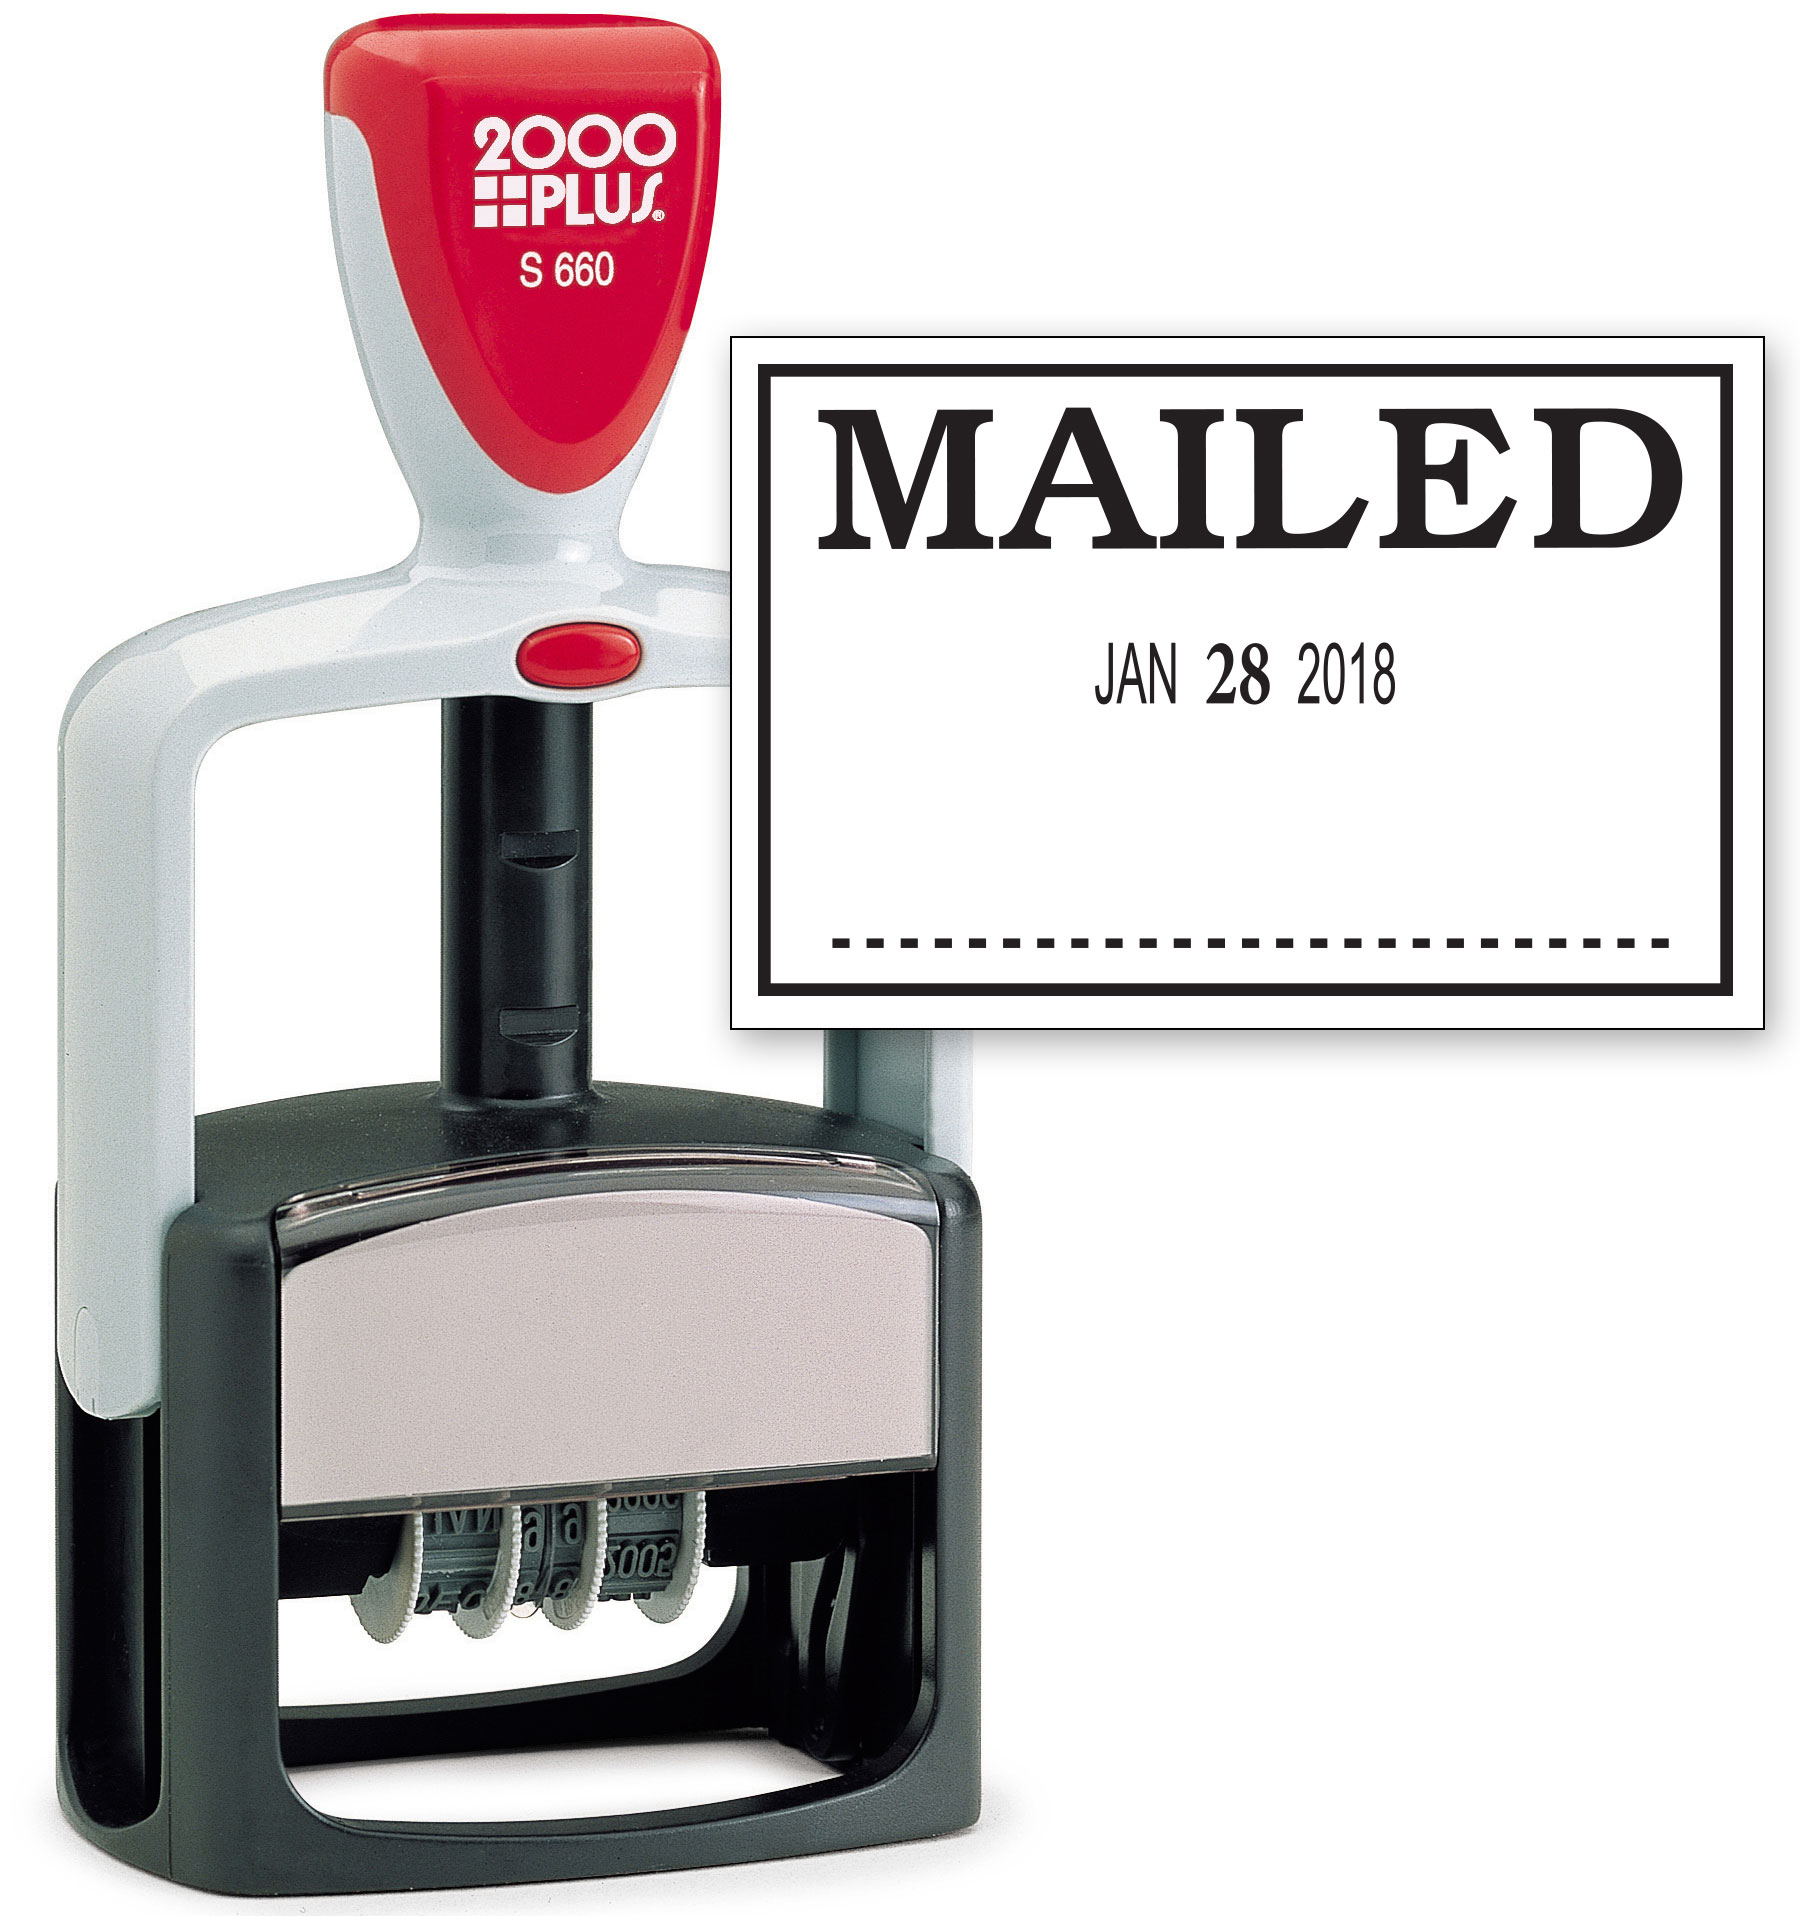 2000 PLUS Heavy Duty Style 2-Color Date Stamp with MAILED self inking stamp - BLACK Ink